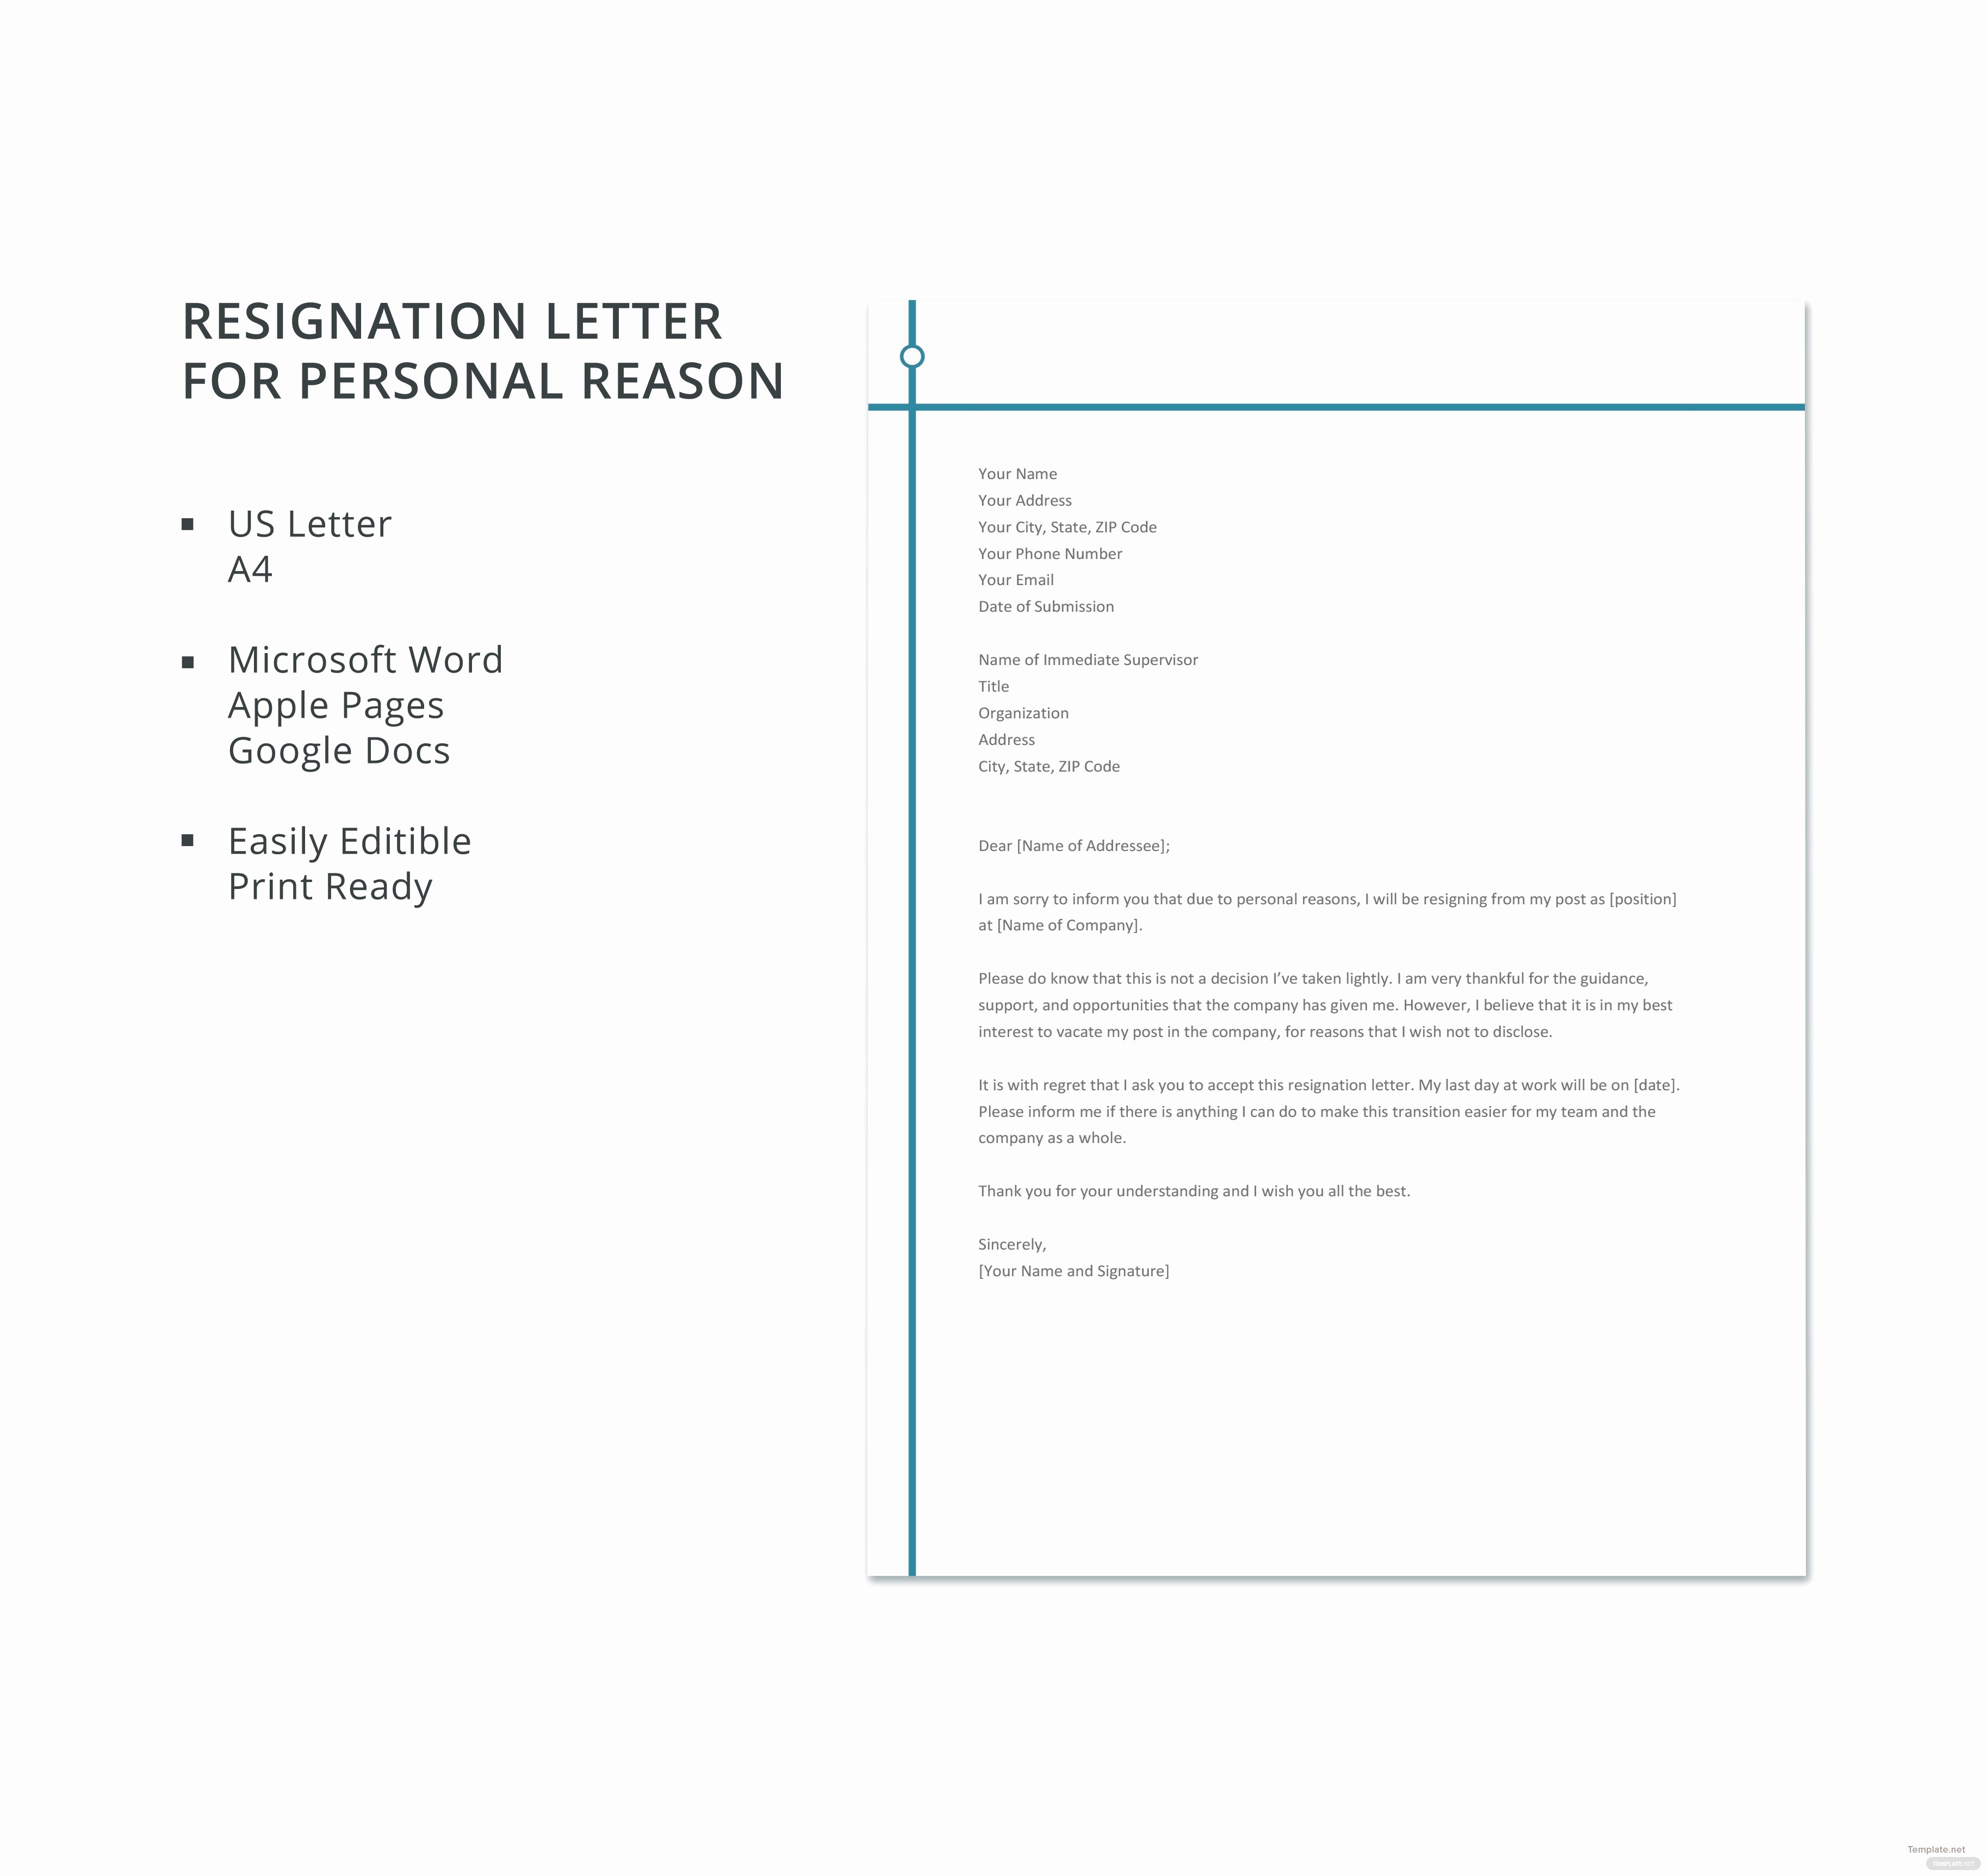 Letter Template Google Docs Inspirational Free Resignation Letter Template for Personal Reason In